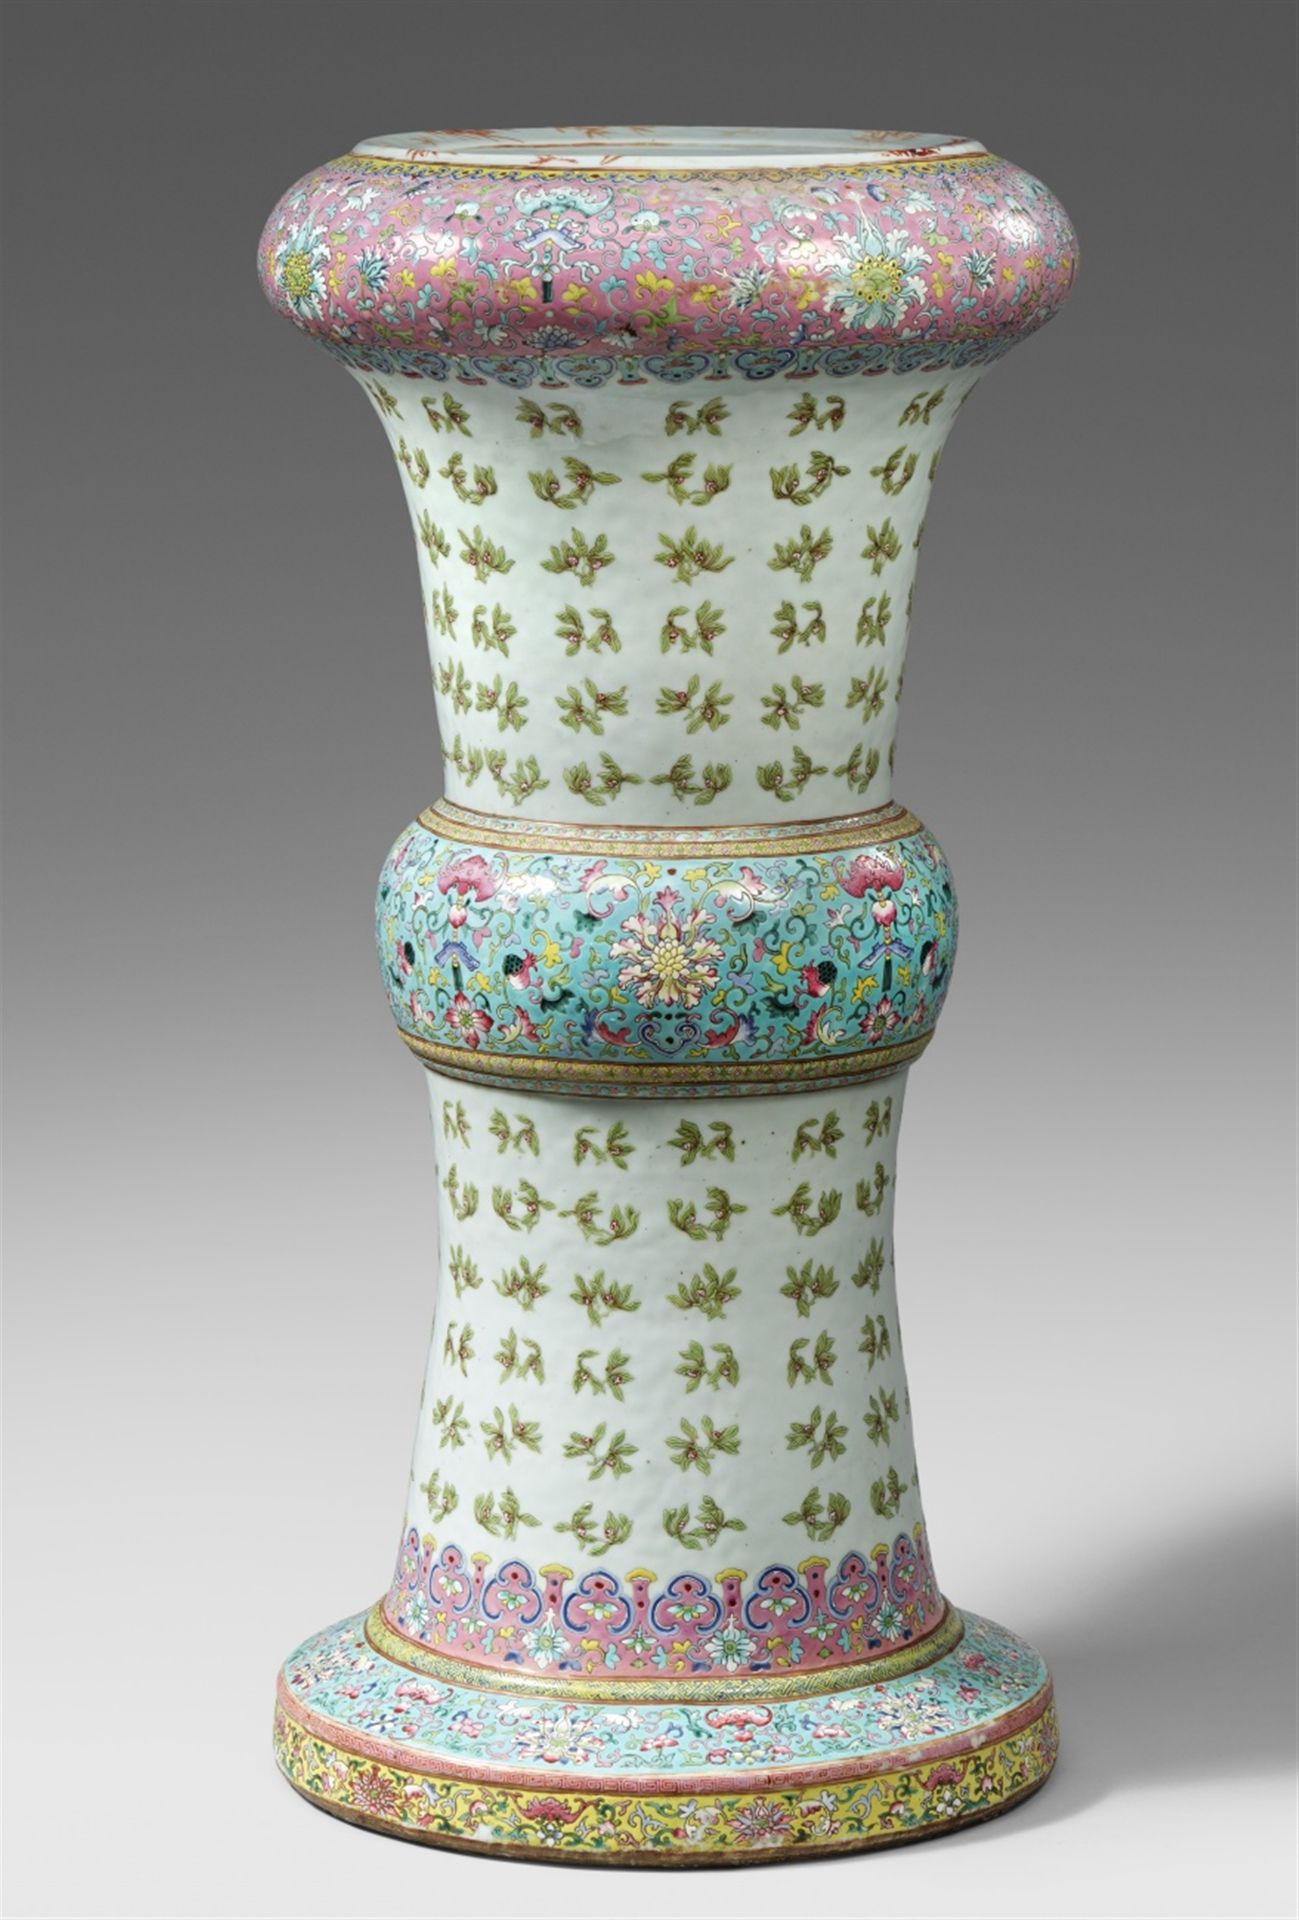 A famille rose pedestal stand for a jardiniere. Late Qing dynasty